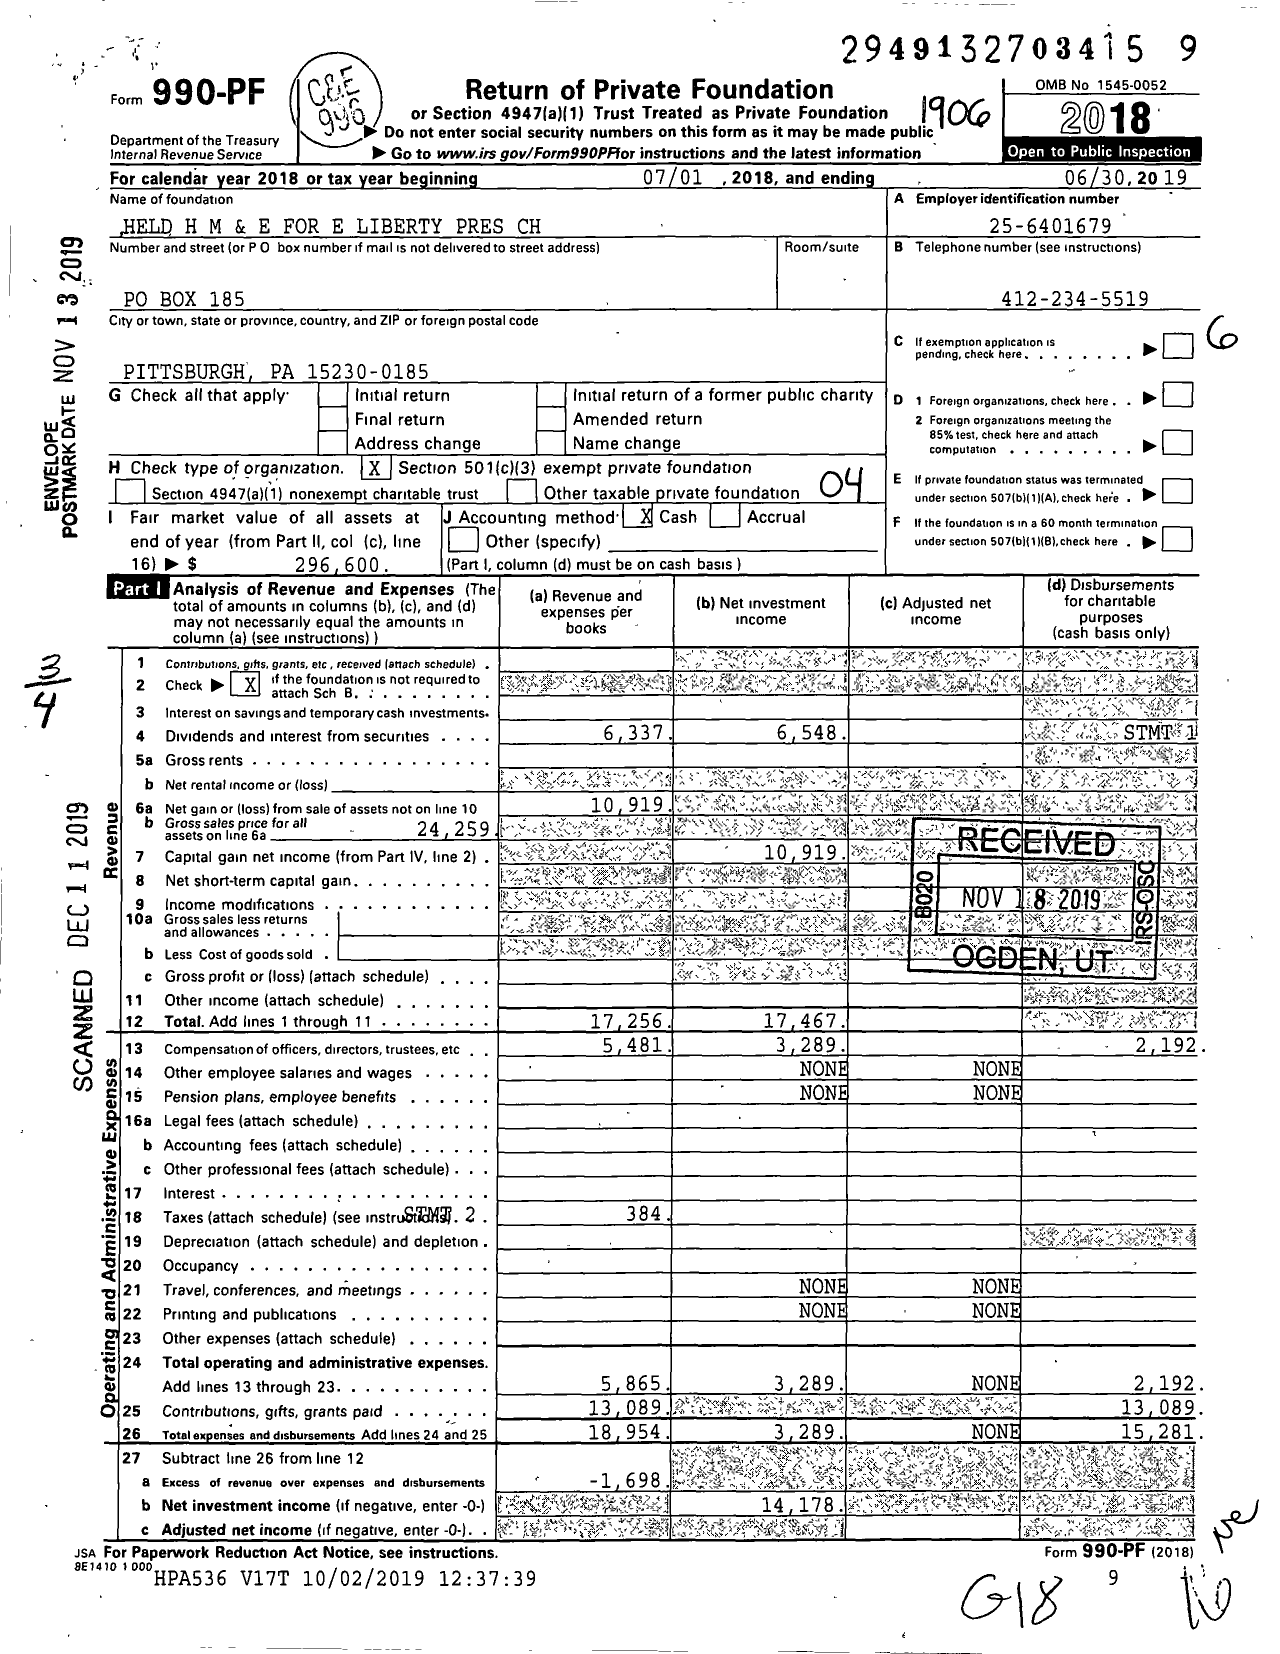 Image of first page of 2018 Form 990PF for Held H M and E for E Liberty Pres CH